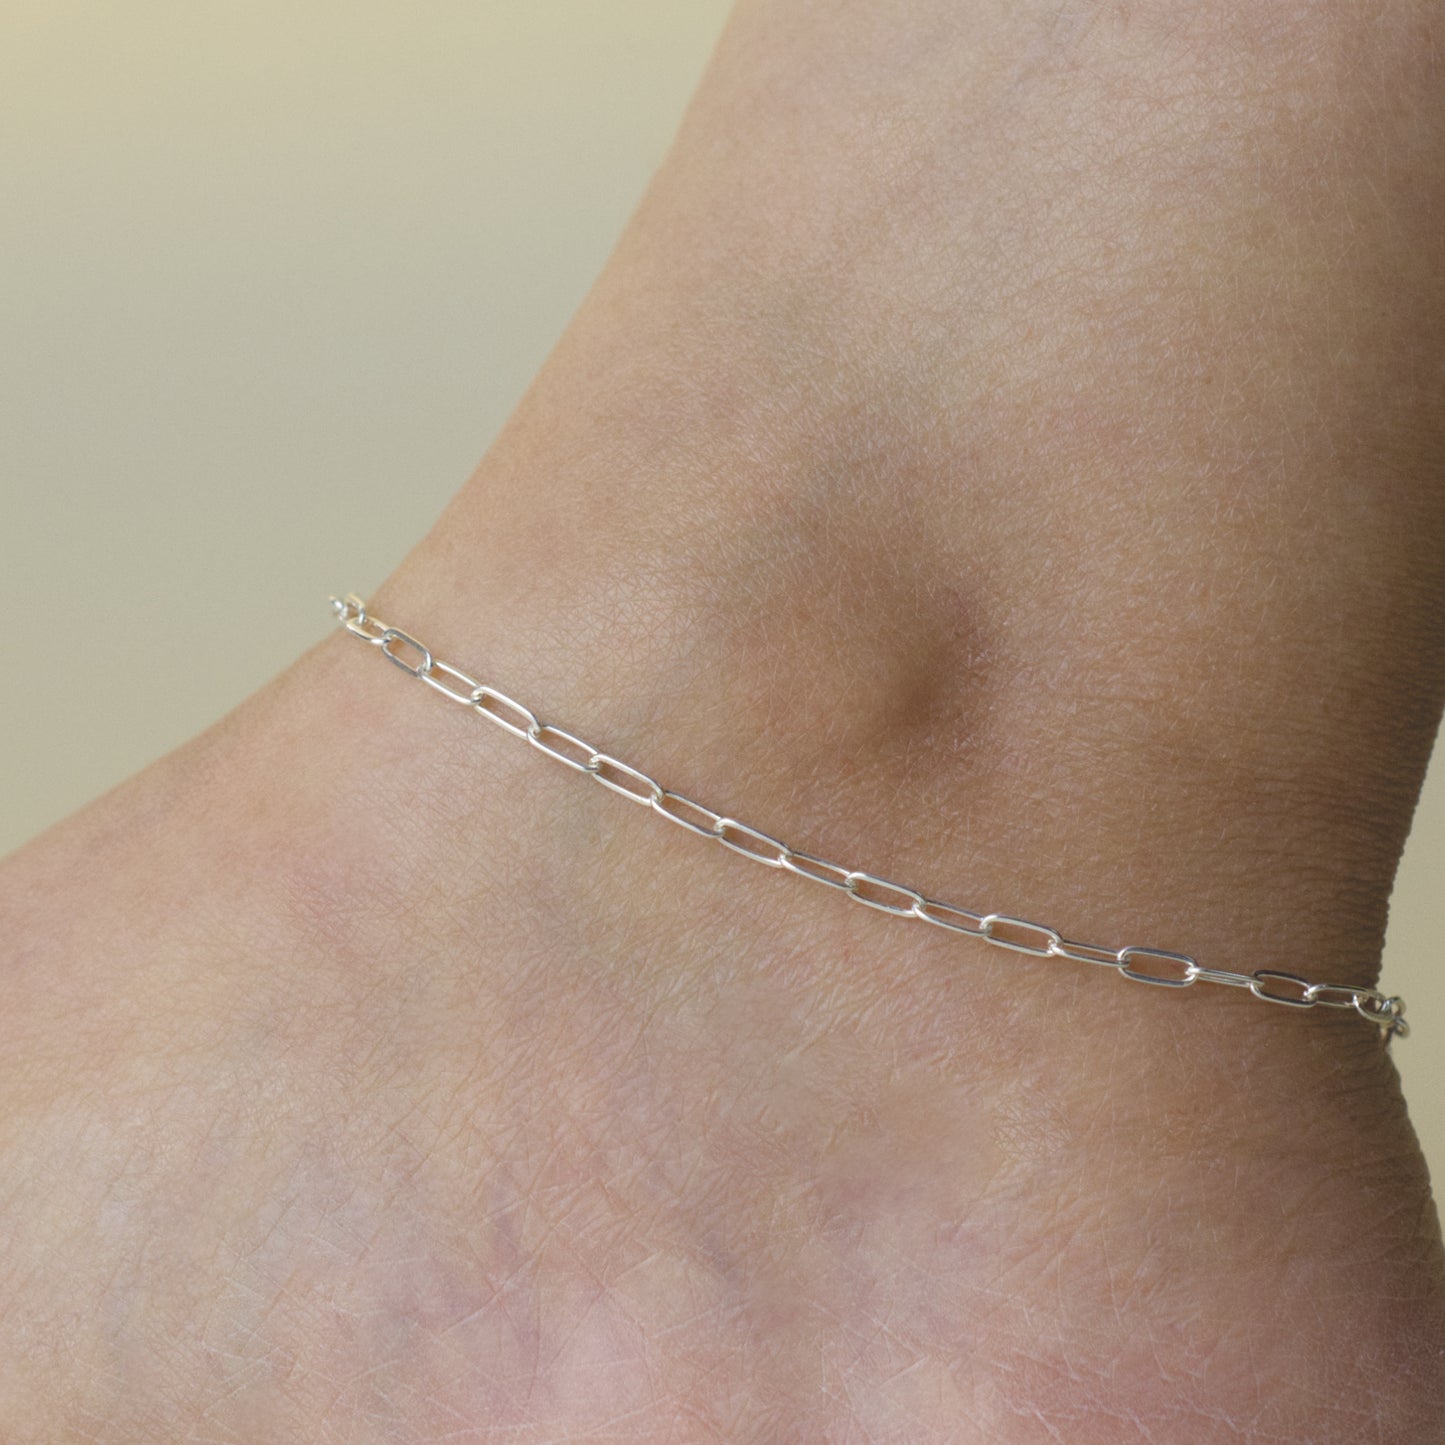 Woman wearing a 925 sterling silver paperclip chain anklet with a dainty style (medium) link size